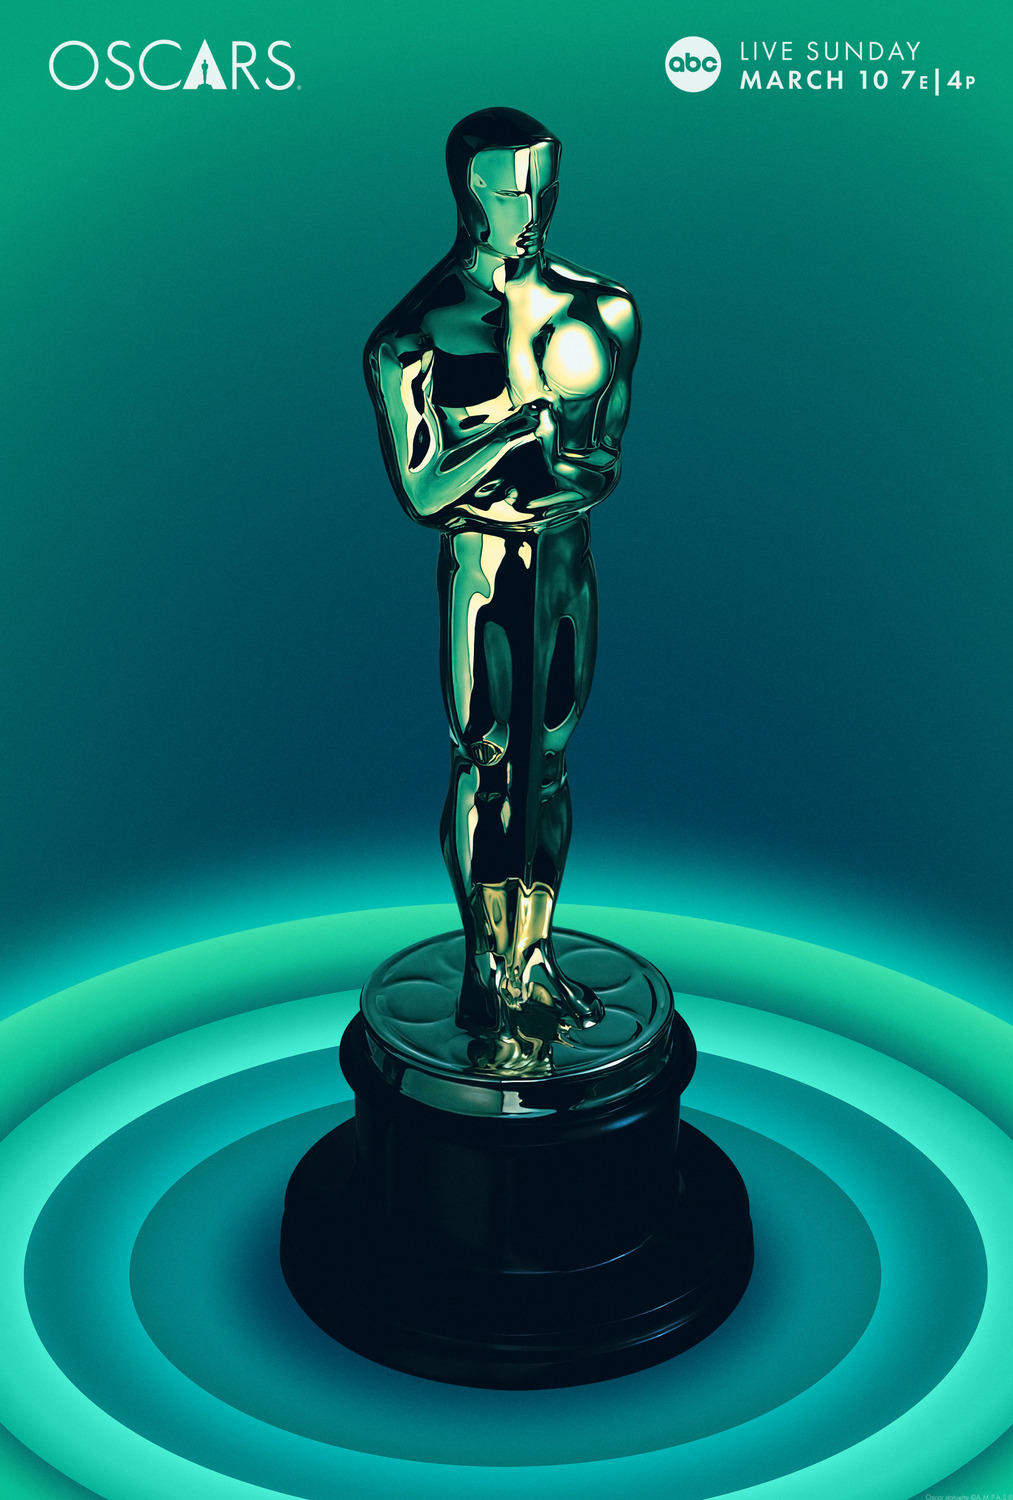 Extra Large TV Poster Image for The Oscars (#39 of 41)